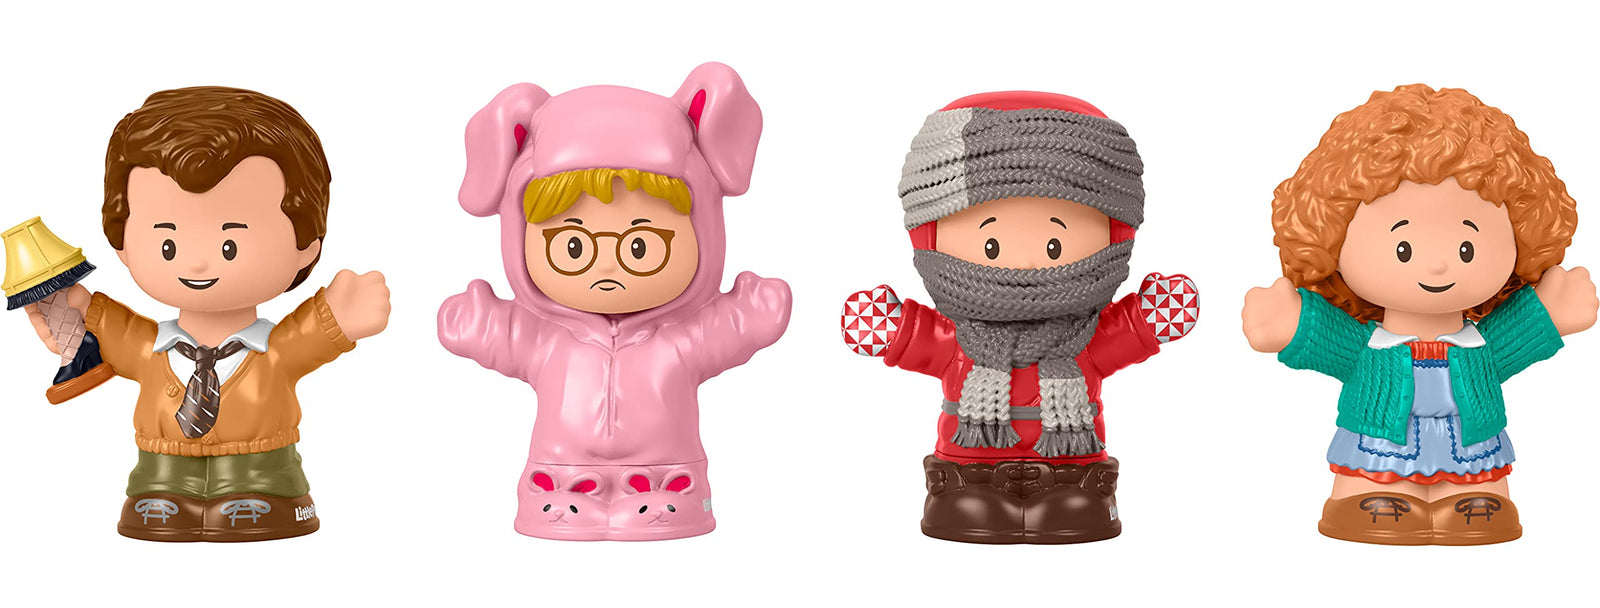 Fisher-Price Little People Collector A Christmas Story, Special Edition Figure Set with 4 Characters from The Classic Holiday Movie